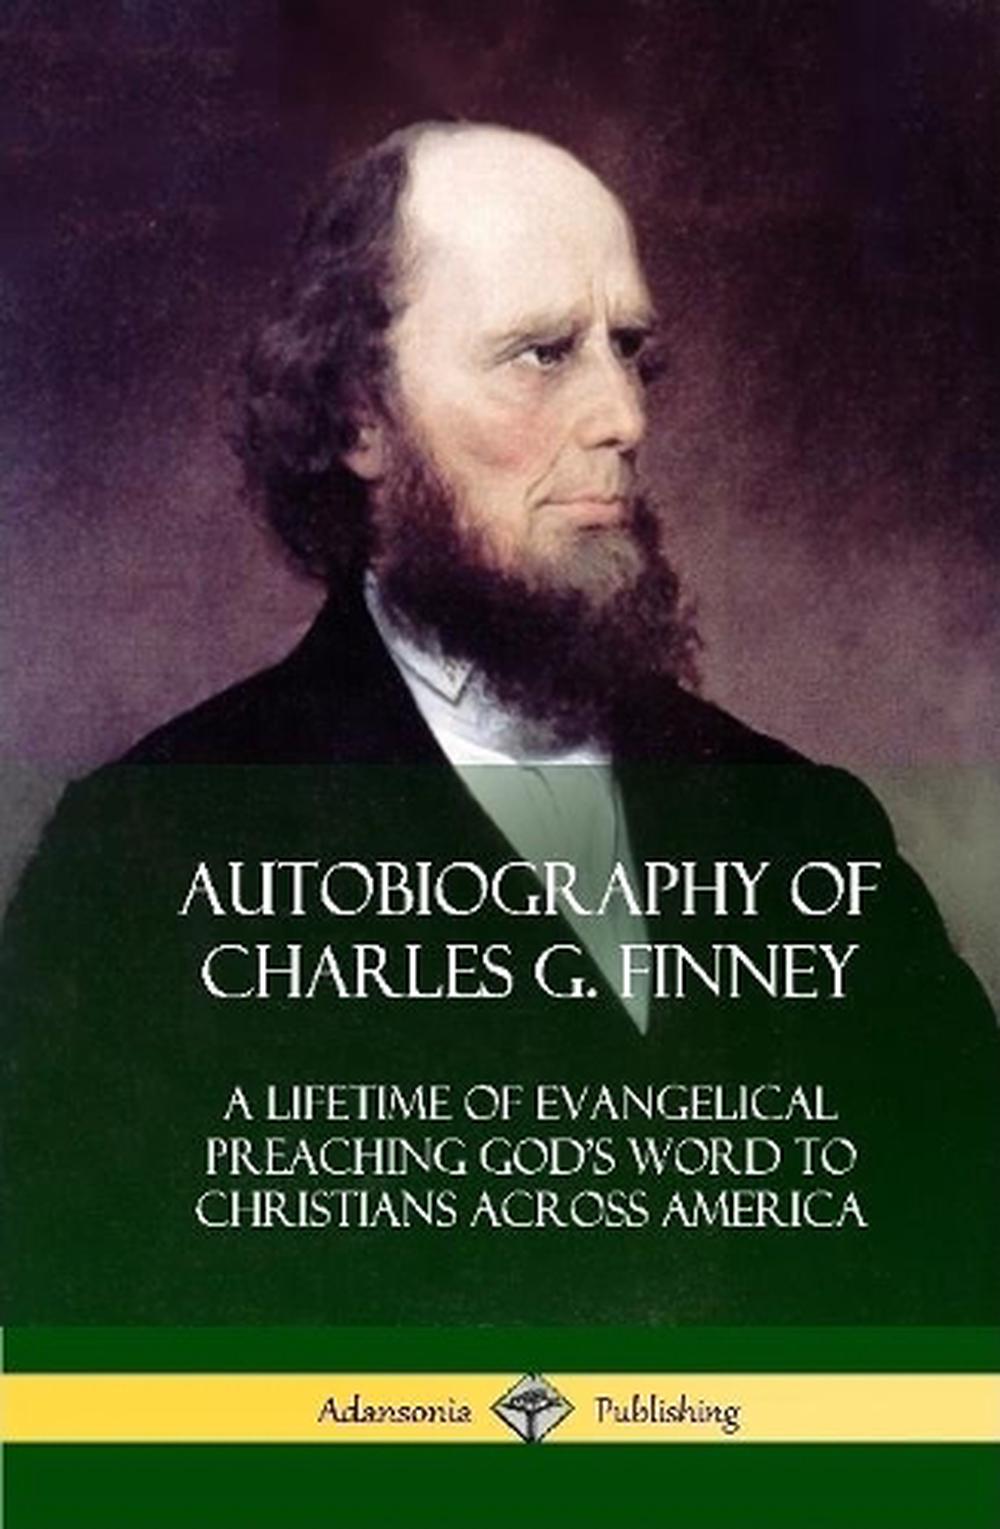 Autobiography of Charles G. Finney: A Lifetime of Evangelical Preaching ...